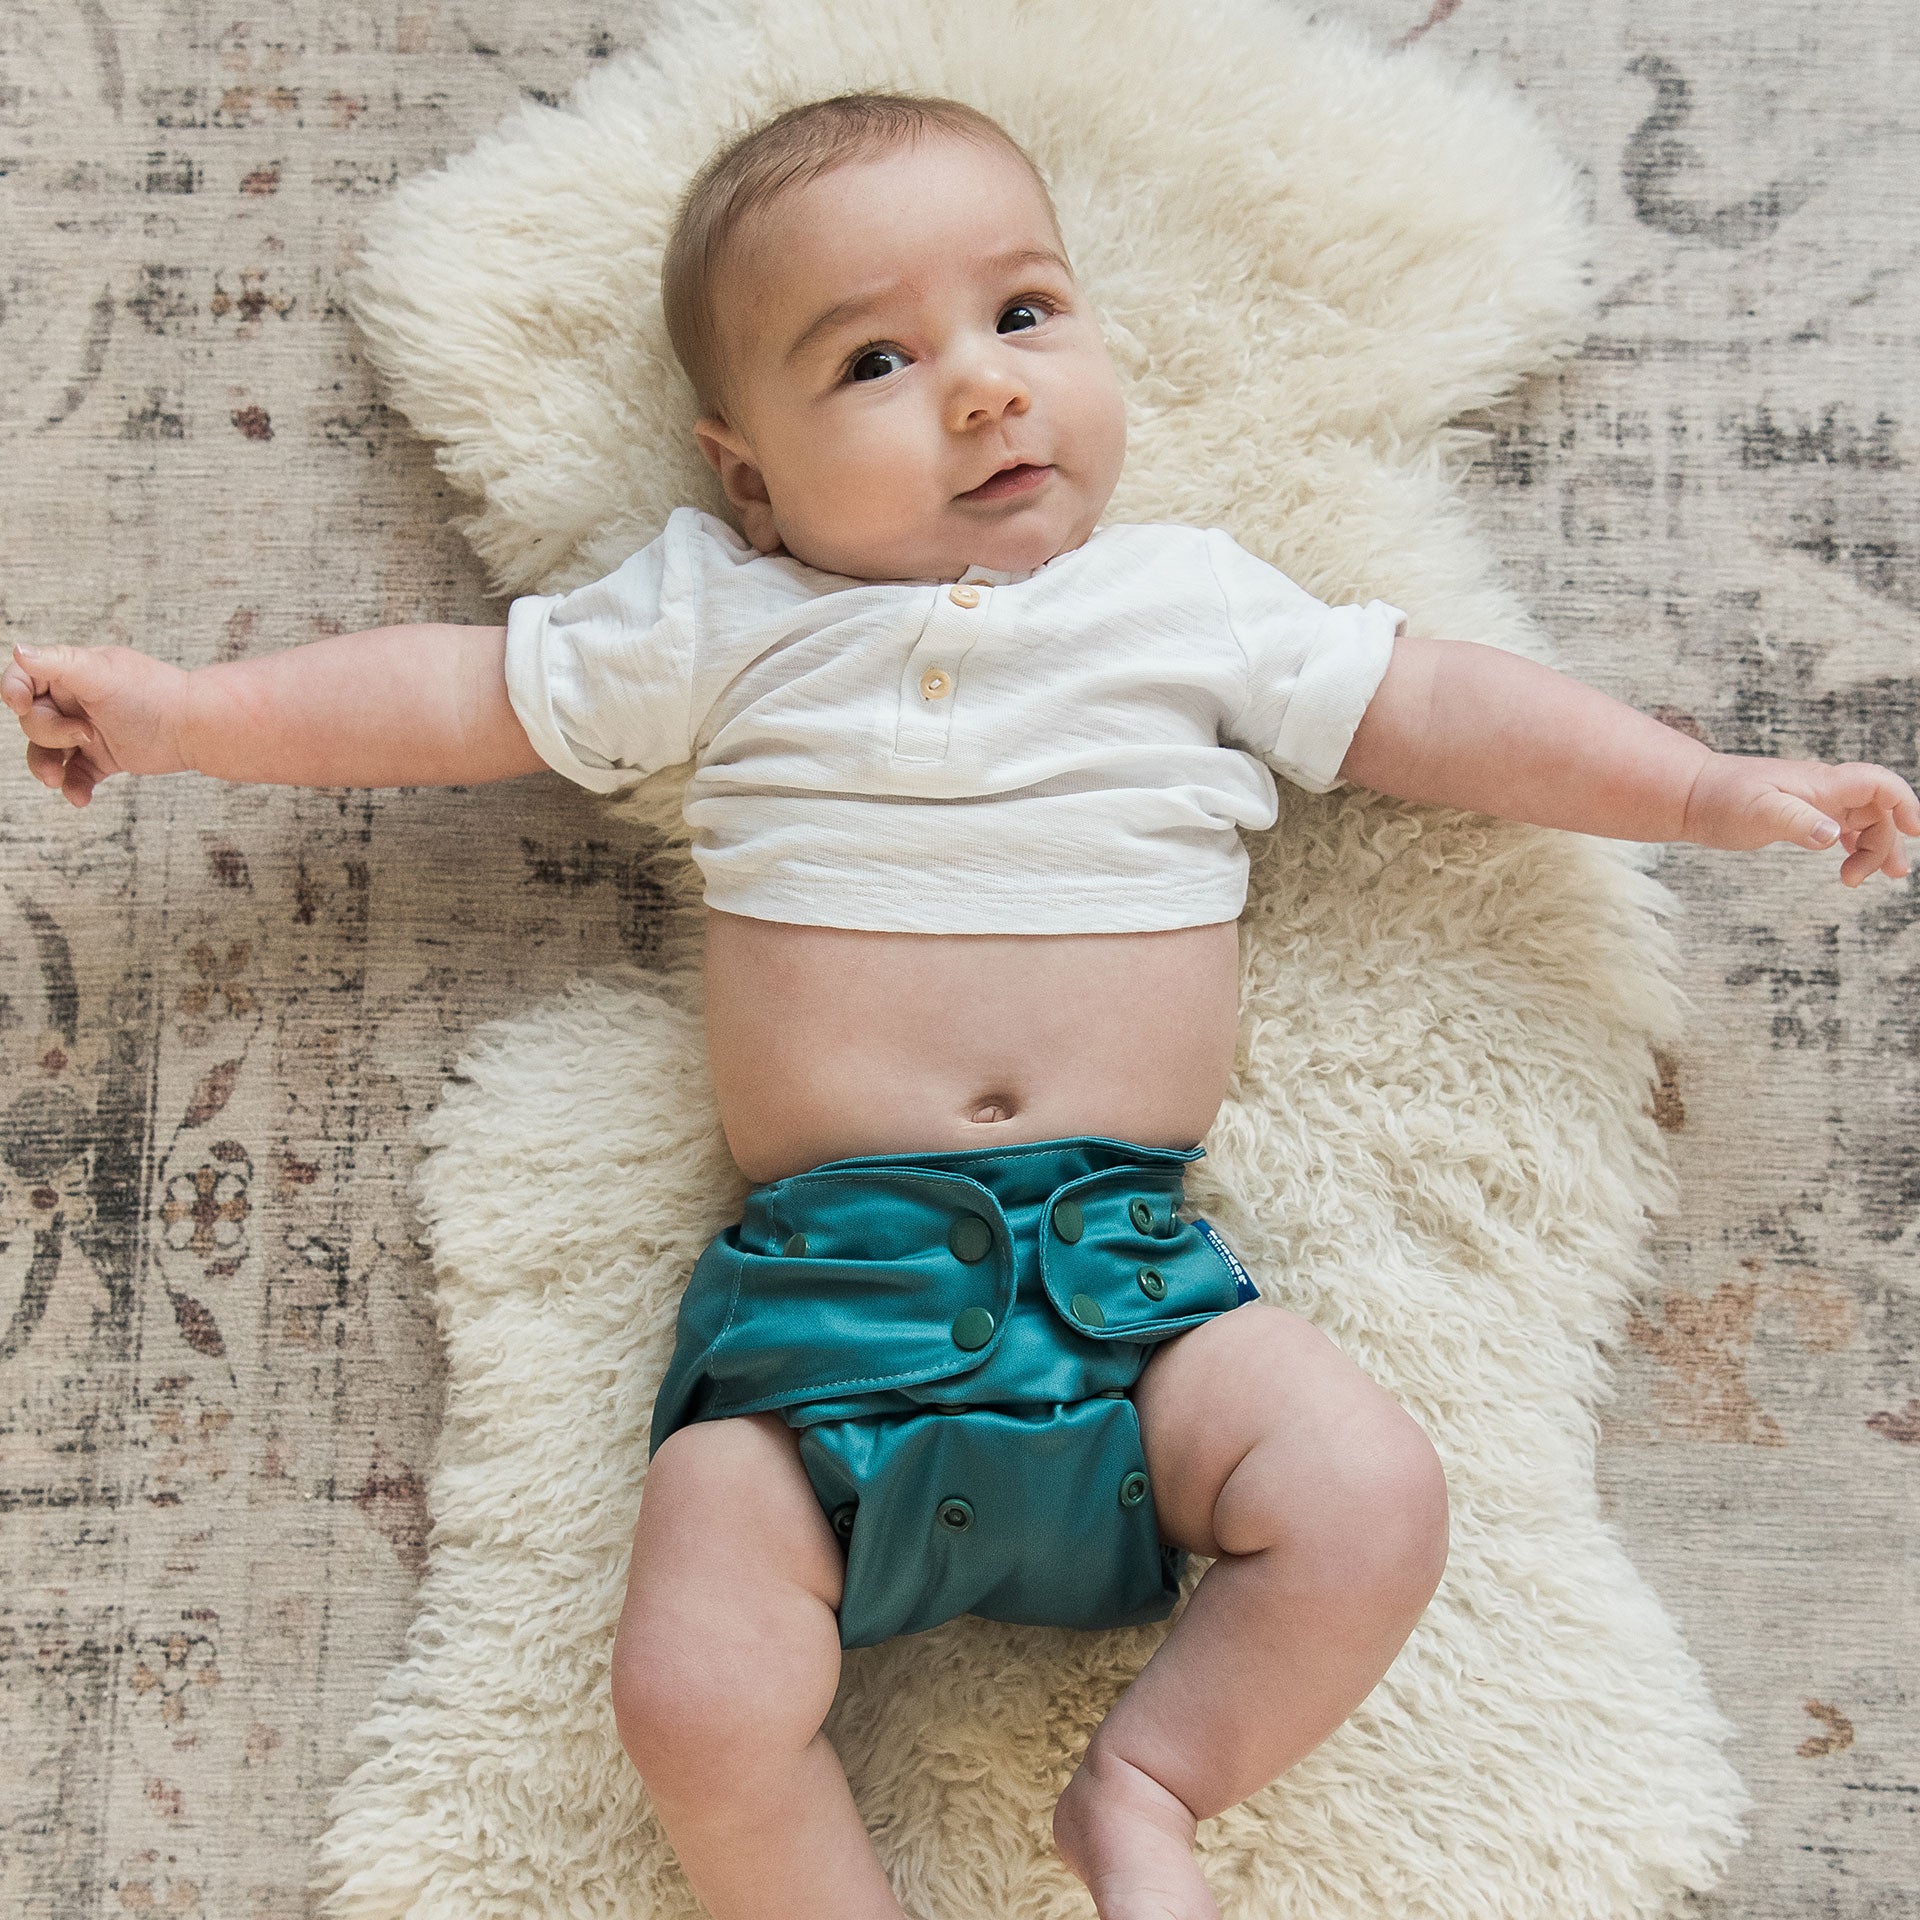 modern reusable diapers for babies from birth to potty training fits most babies from seven to sixty pounds machine washable cloth diapers with athletic wicking jersey teal blue gender neutral baby registry gift for cloth diapering families